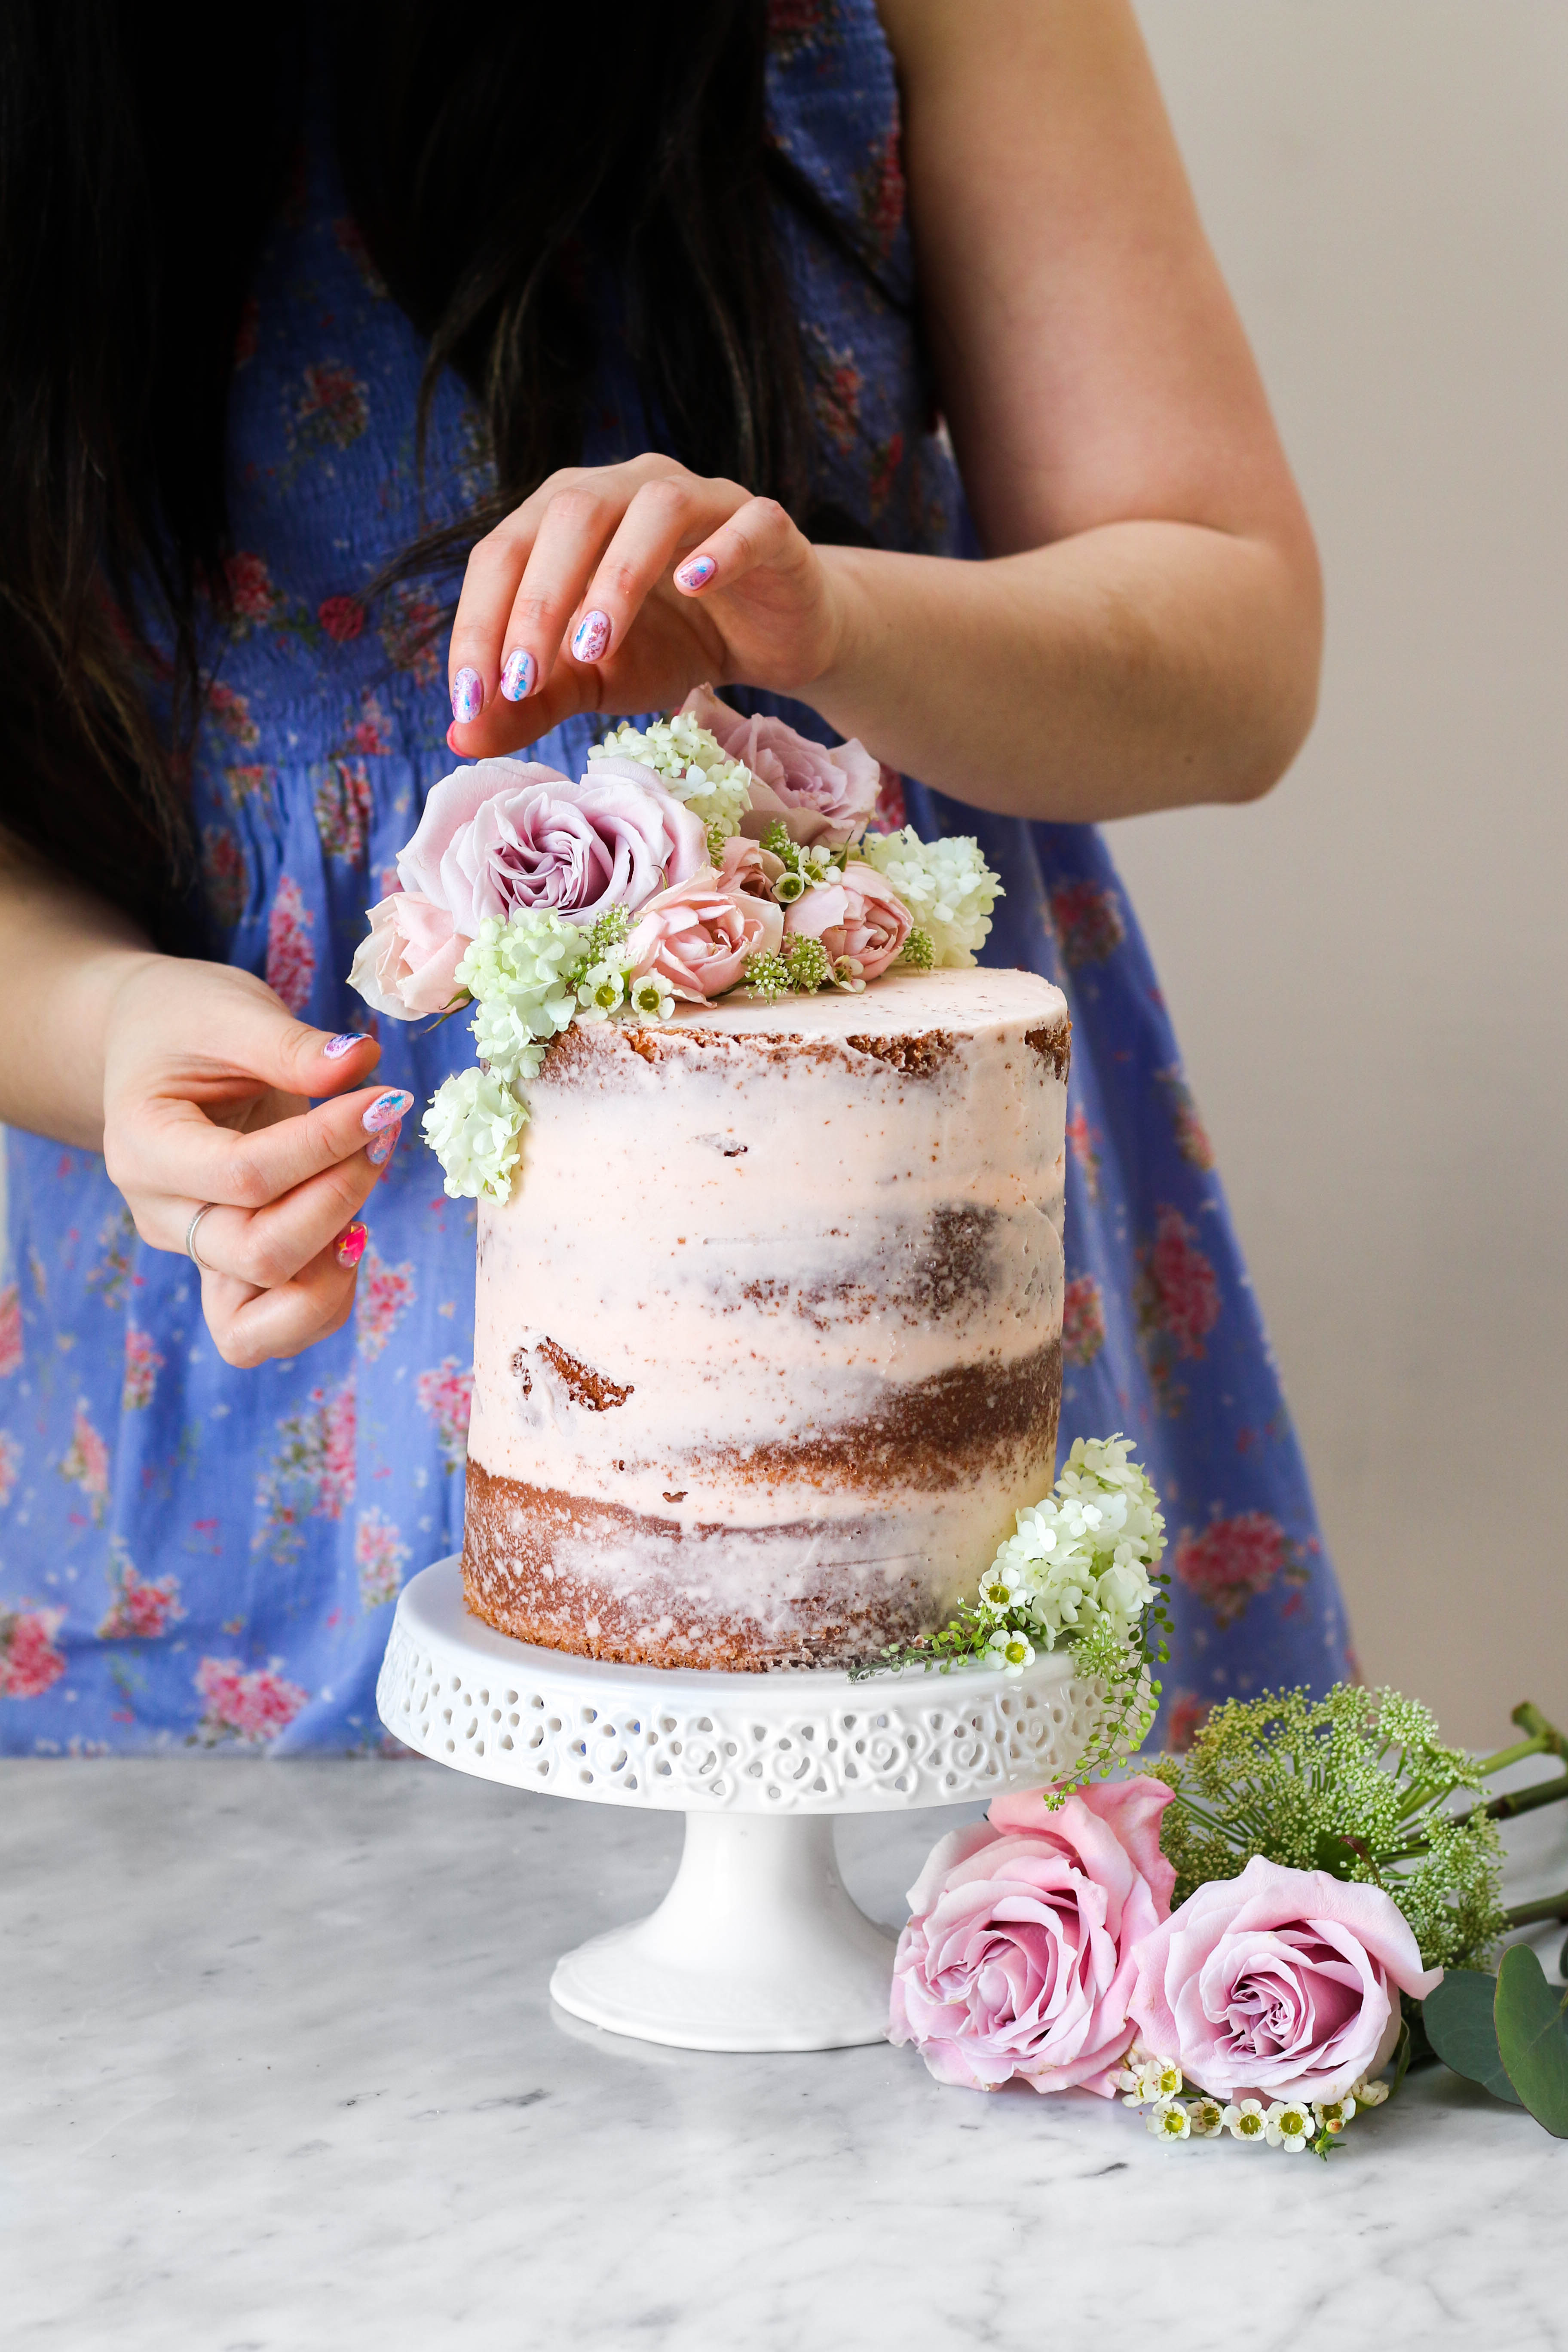 Ten Deliciously Naked Cakes